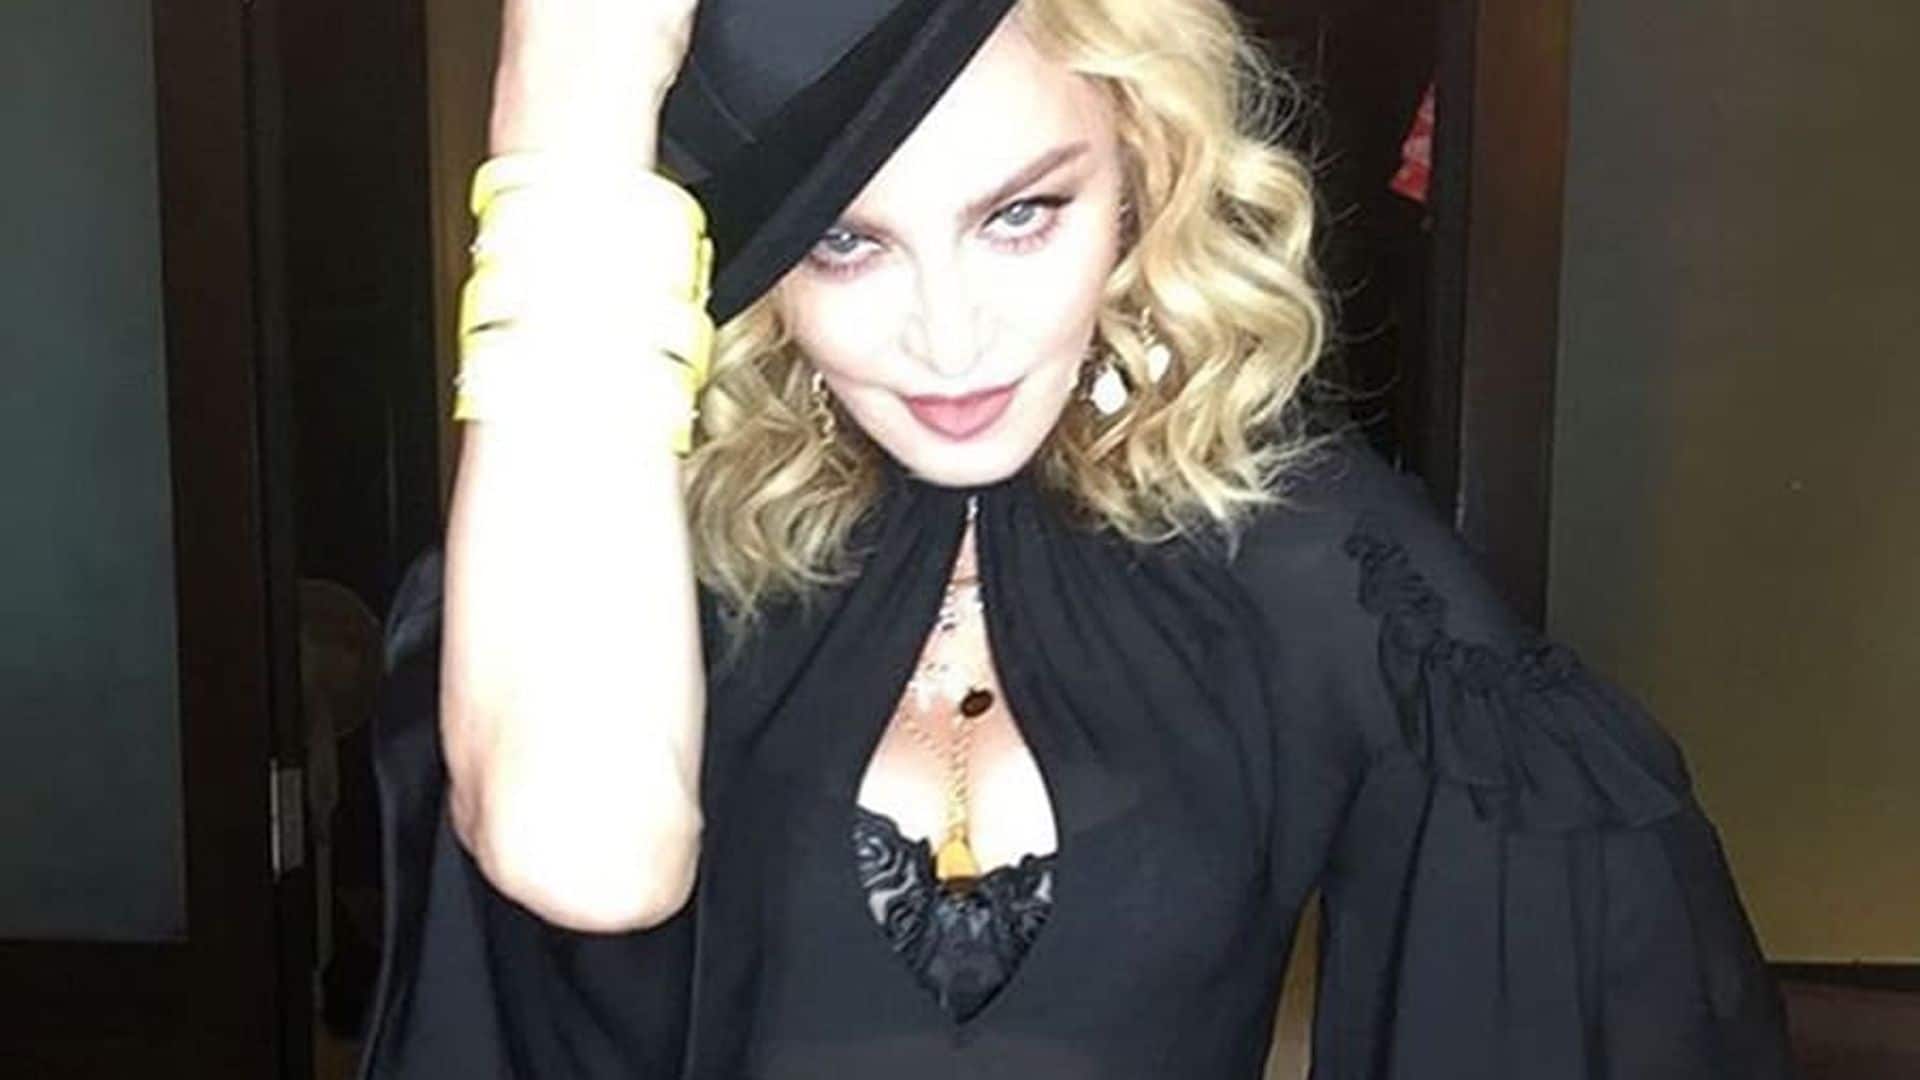 Madonna celebrates 58th birthday dancing on tables in Cuba